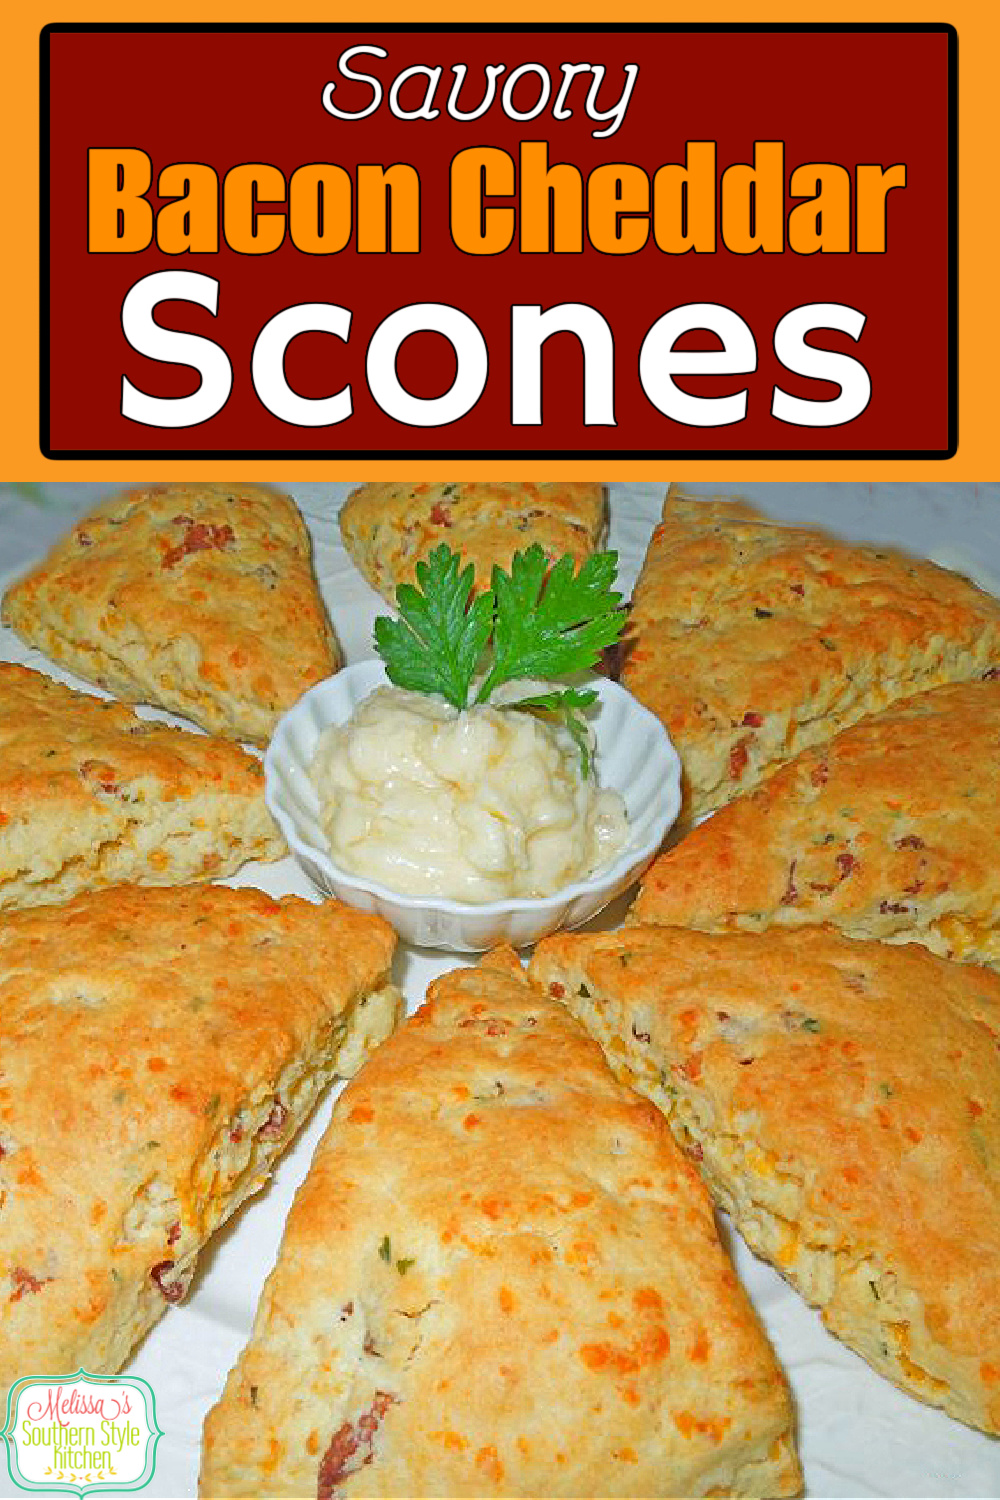 Slather these Savory Bacon and Cheddar Scones with homemade pineapple butter for a spectacular breakfast, brunch or tea time treat. #scones #cheesescones #baconcheddarscones #southernfood #southernrecipes #holidaybrunch #breakfast #holidaybaking #teatime #teaparty #biscuits #cheesebiscuits #bacon via @melissasssk